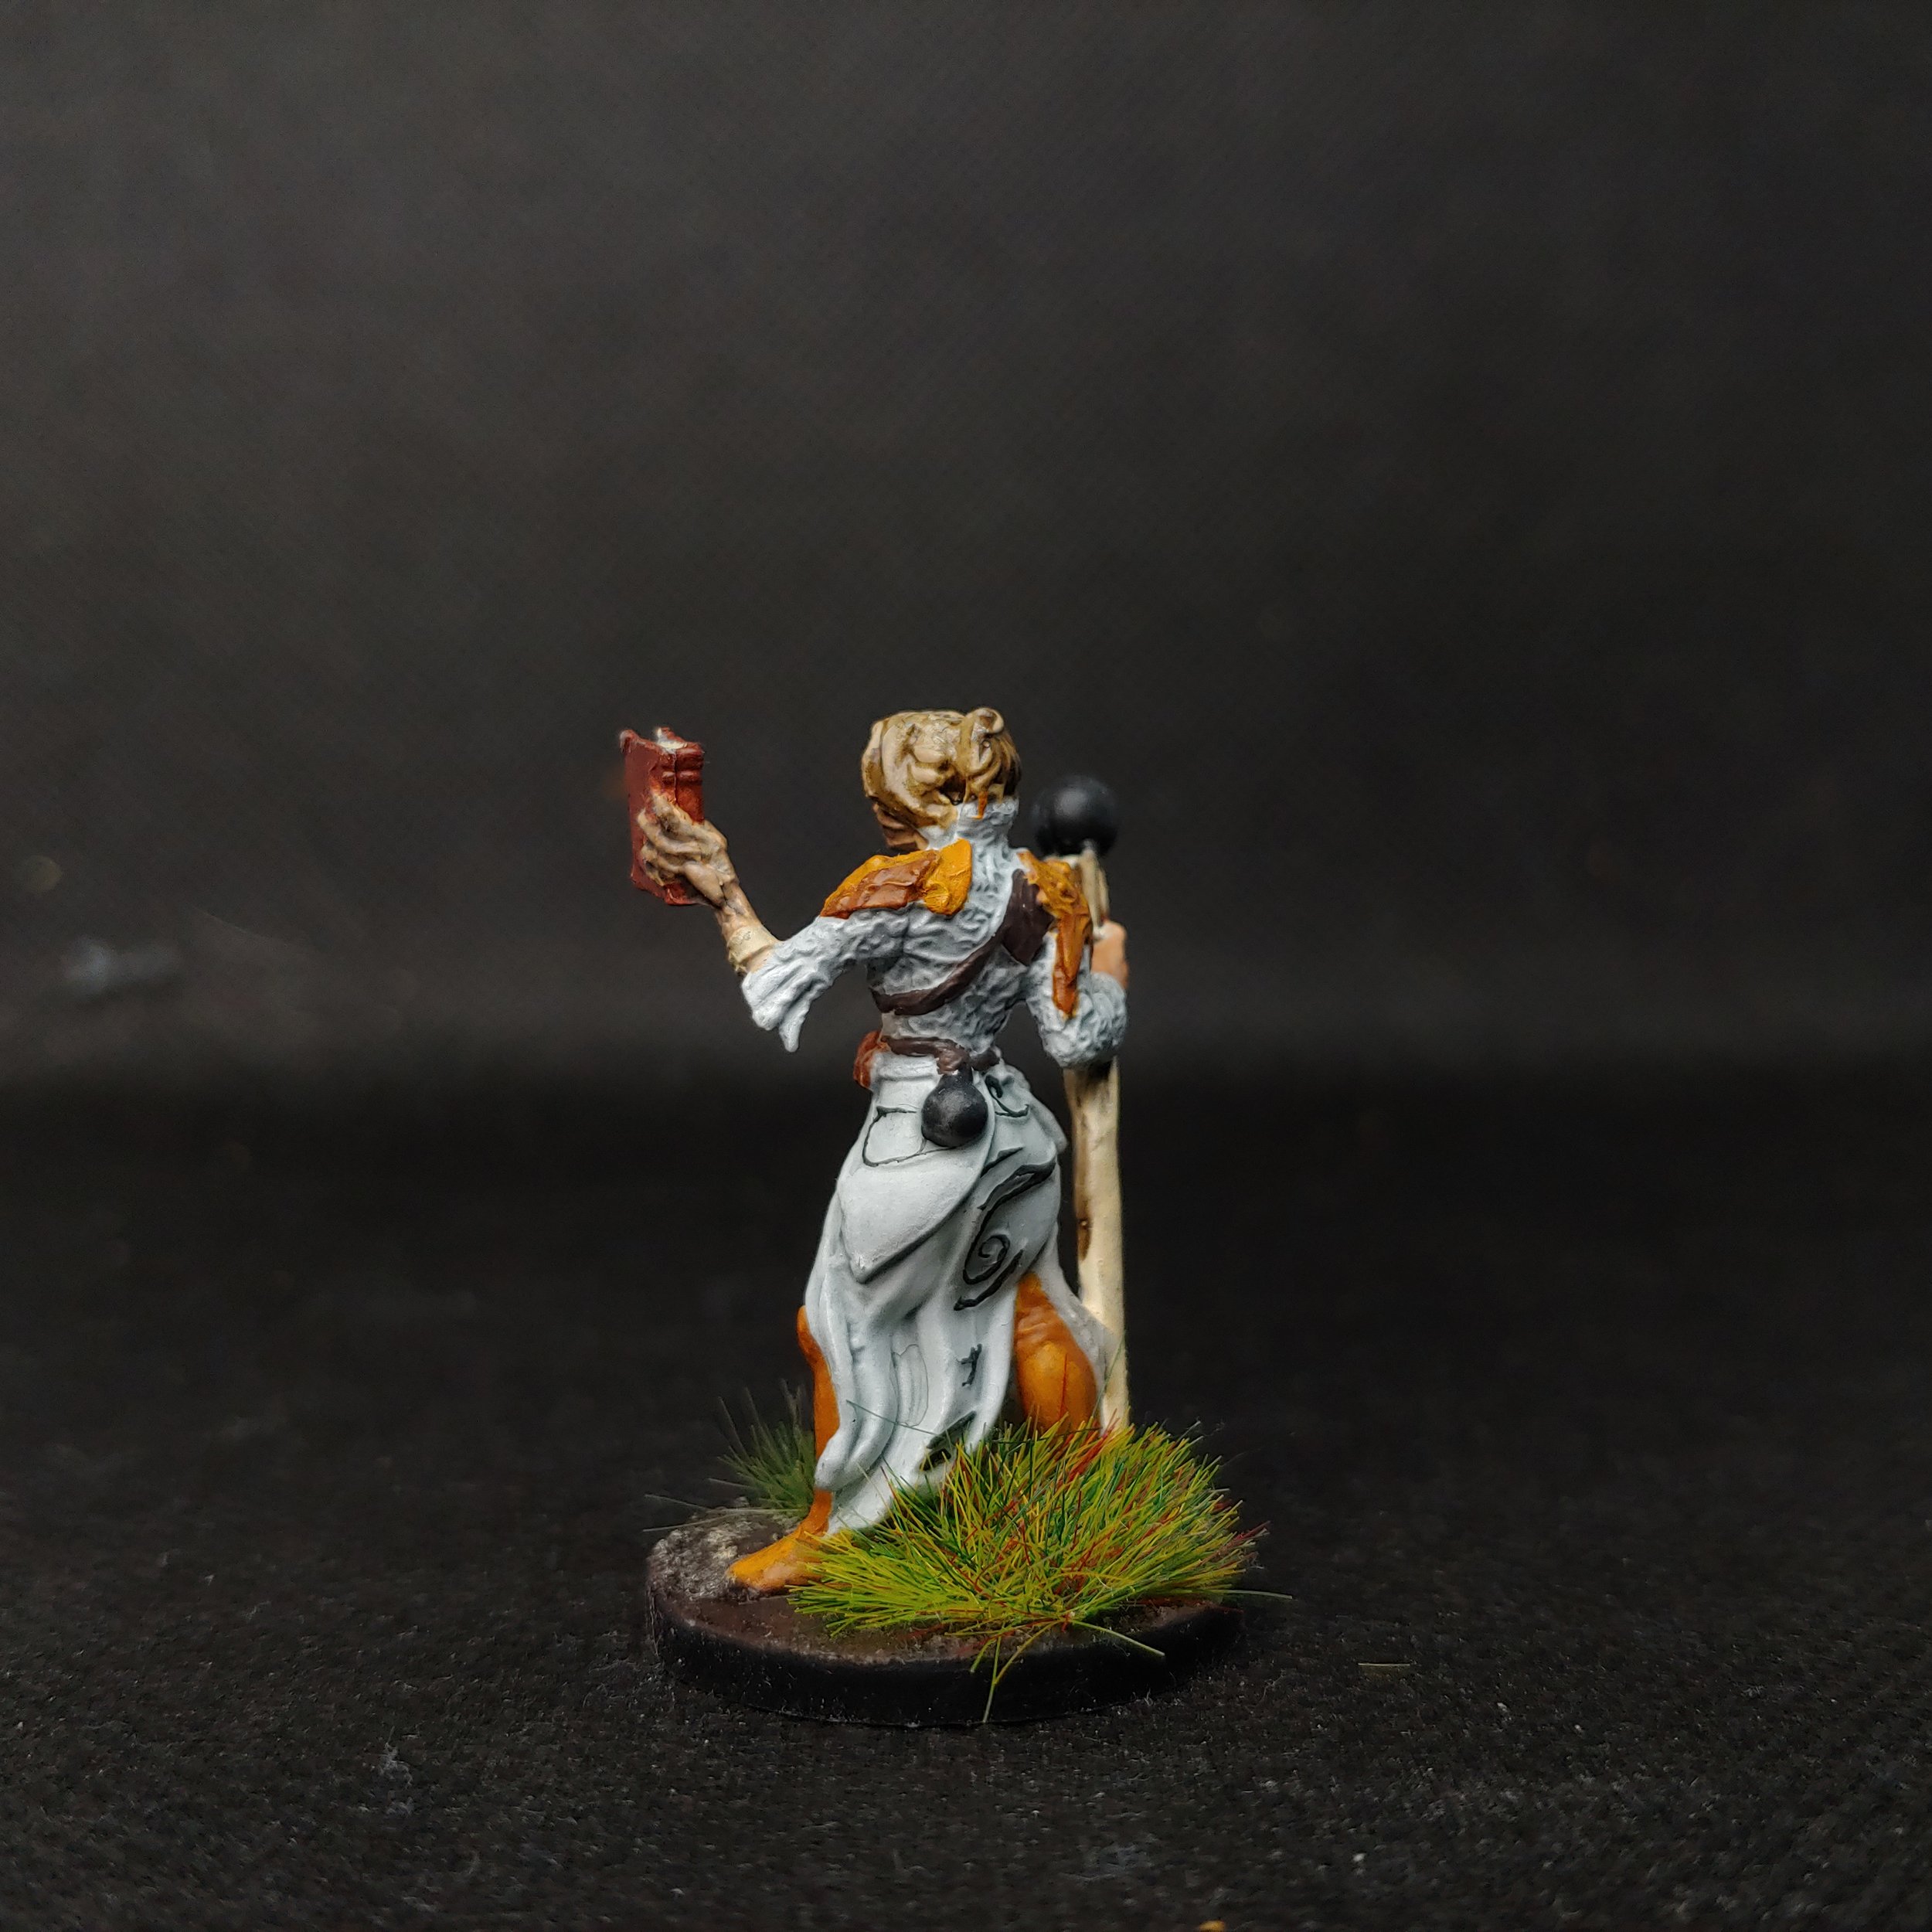 How to: Painting Gloomhaven Miniatures Using $1 Paints!